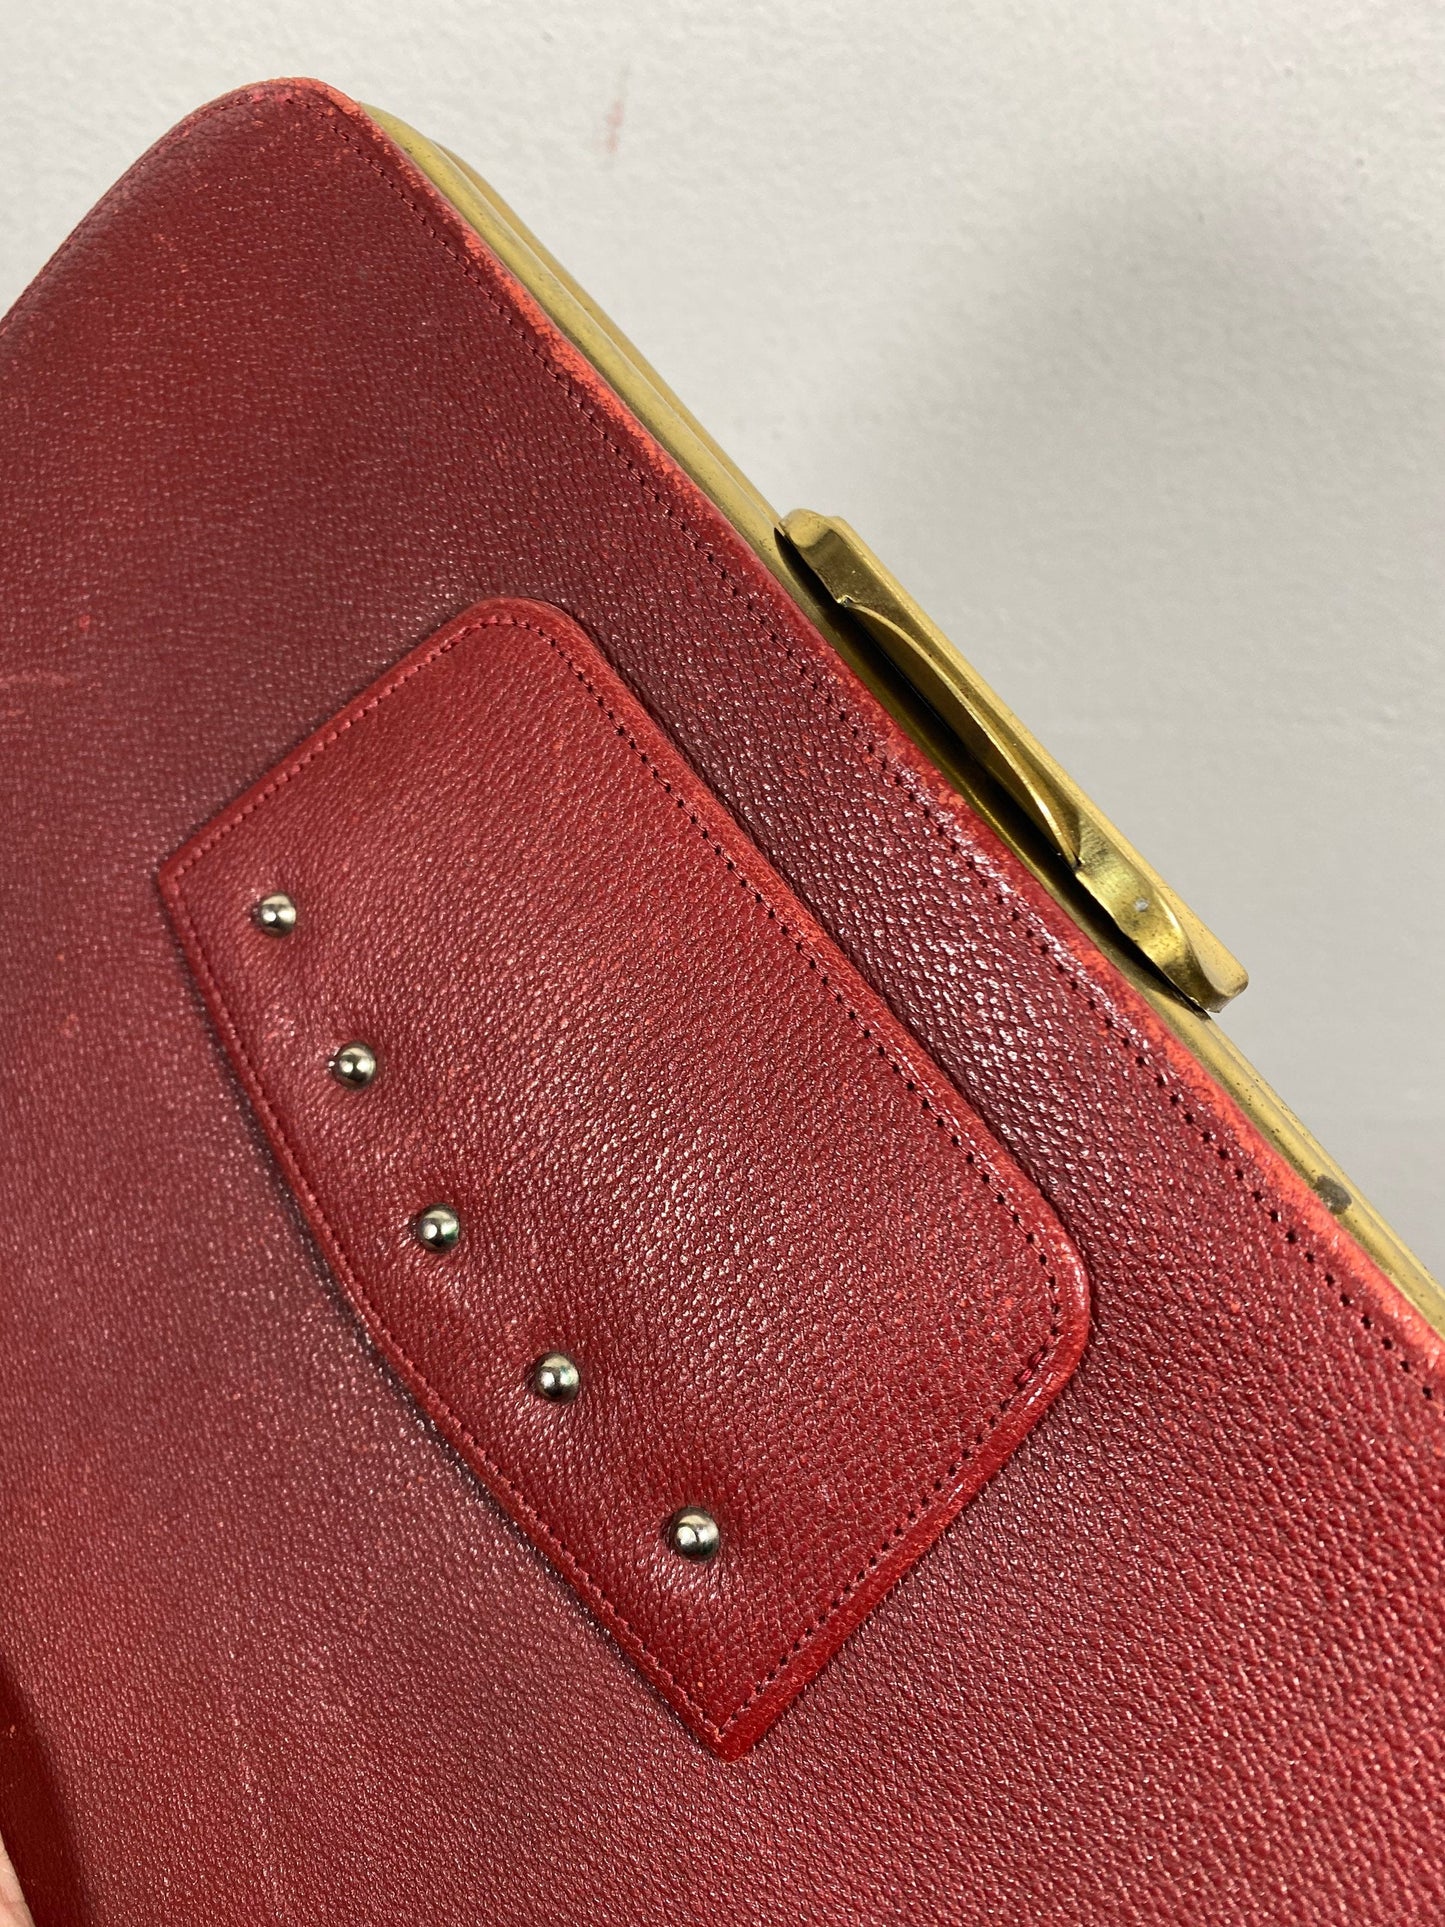 1960s burgundy leather and brass collectible clutch bag in mint condition